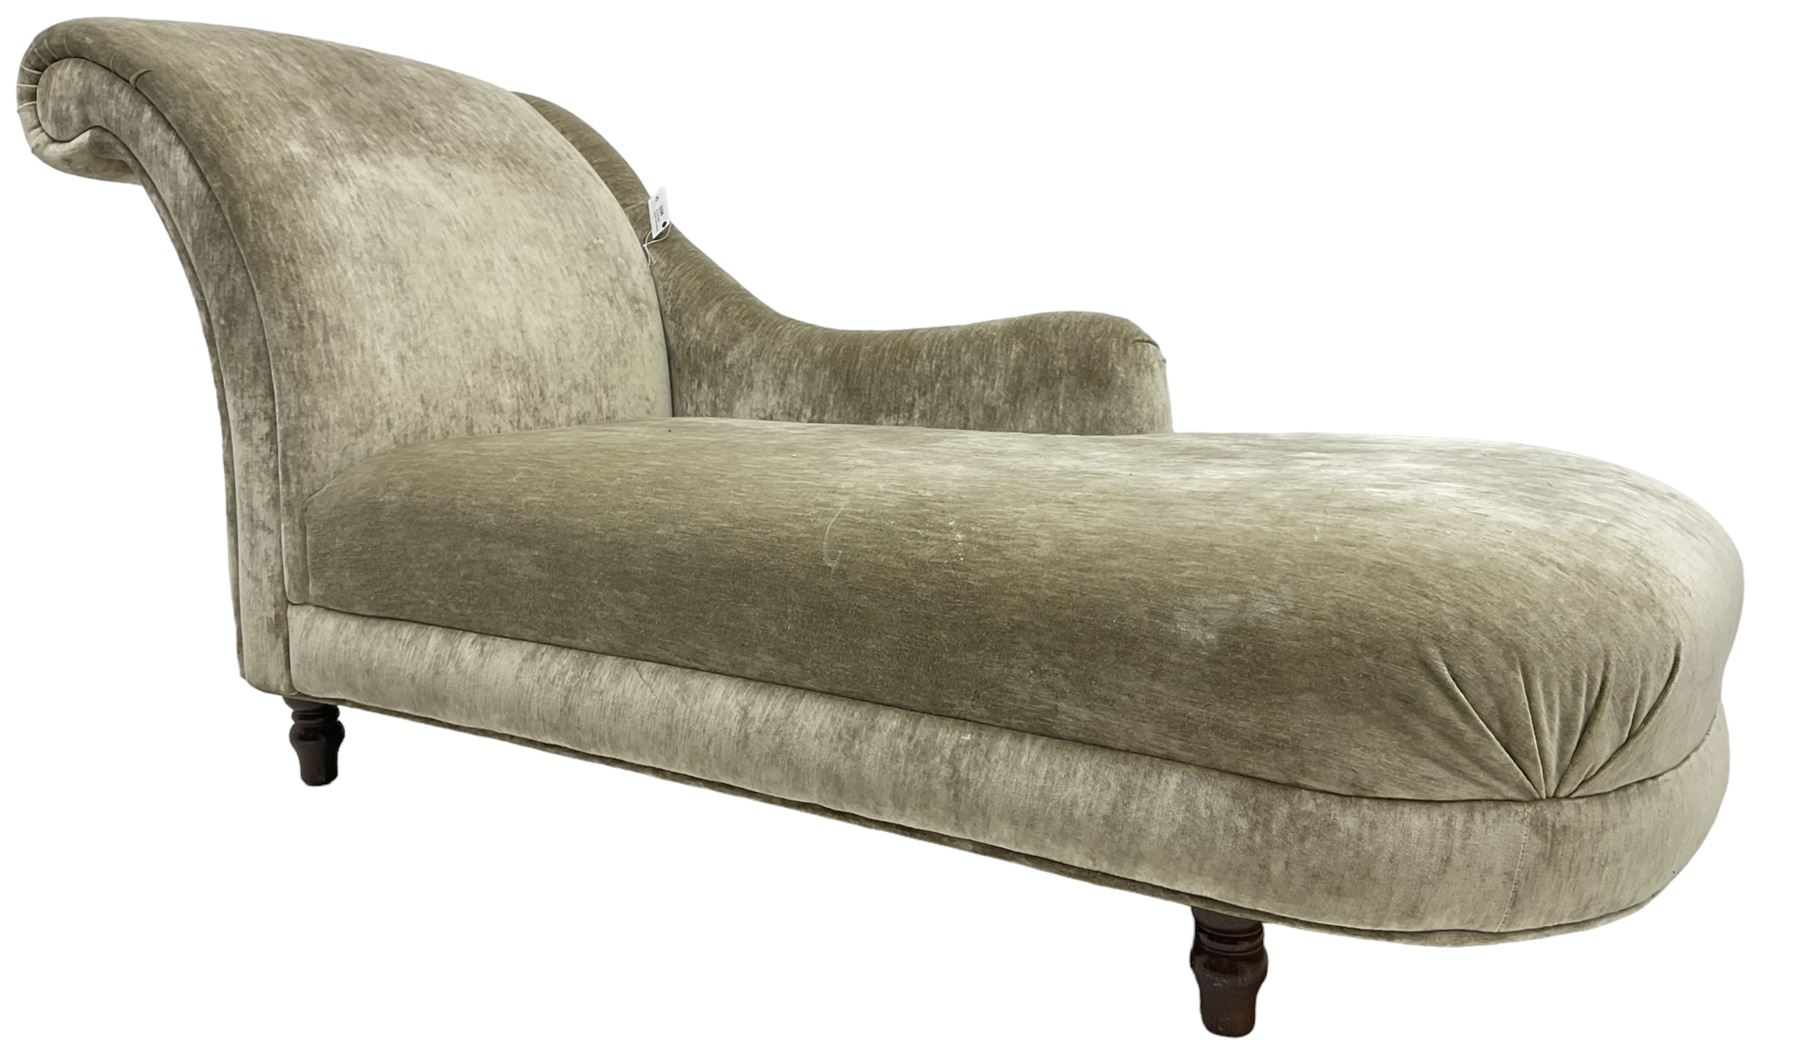 Contemporary chaise longue with scrolled back